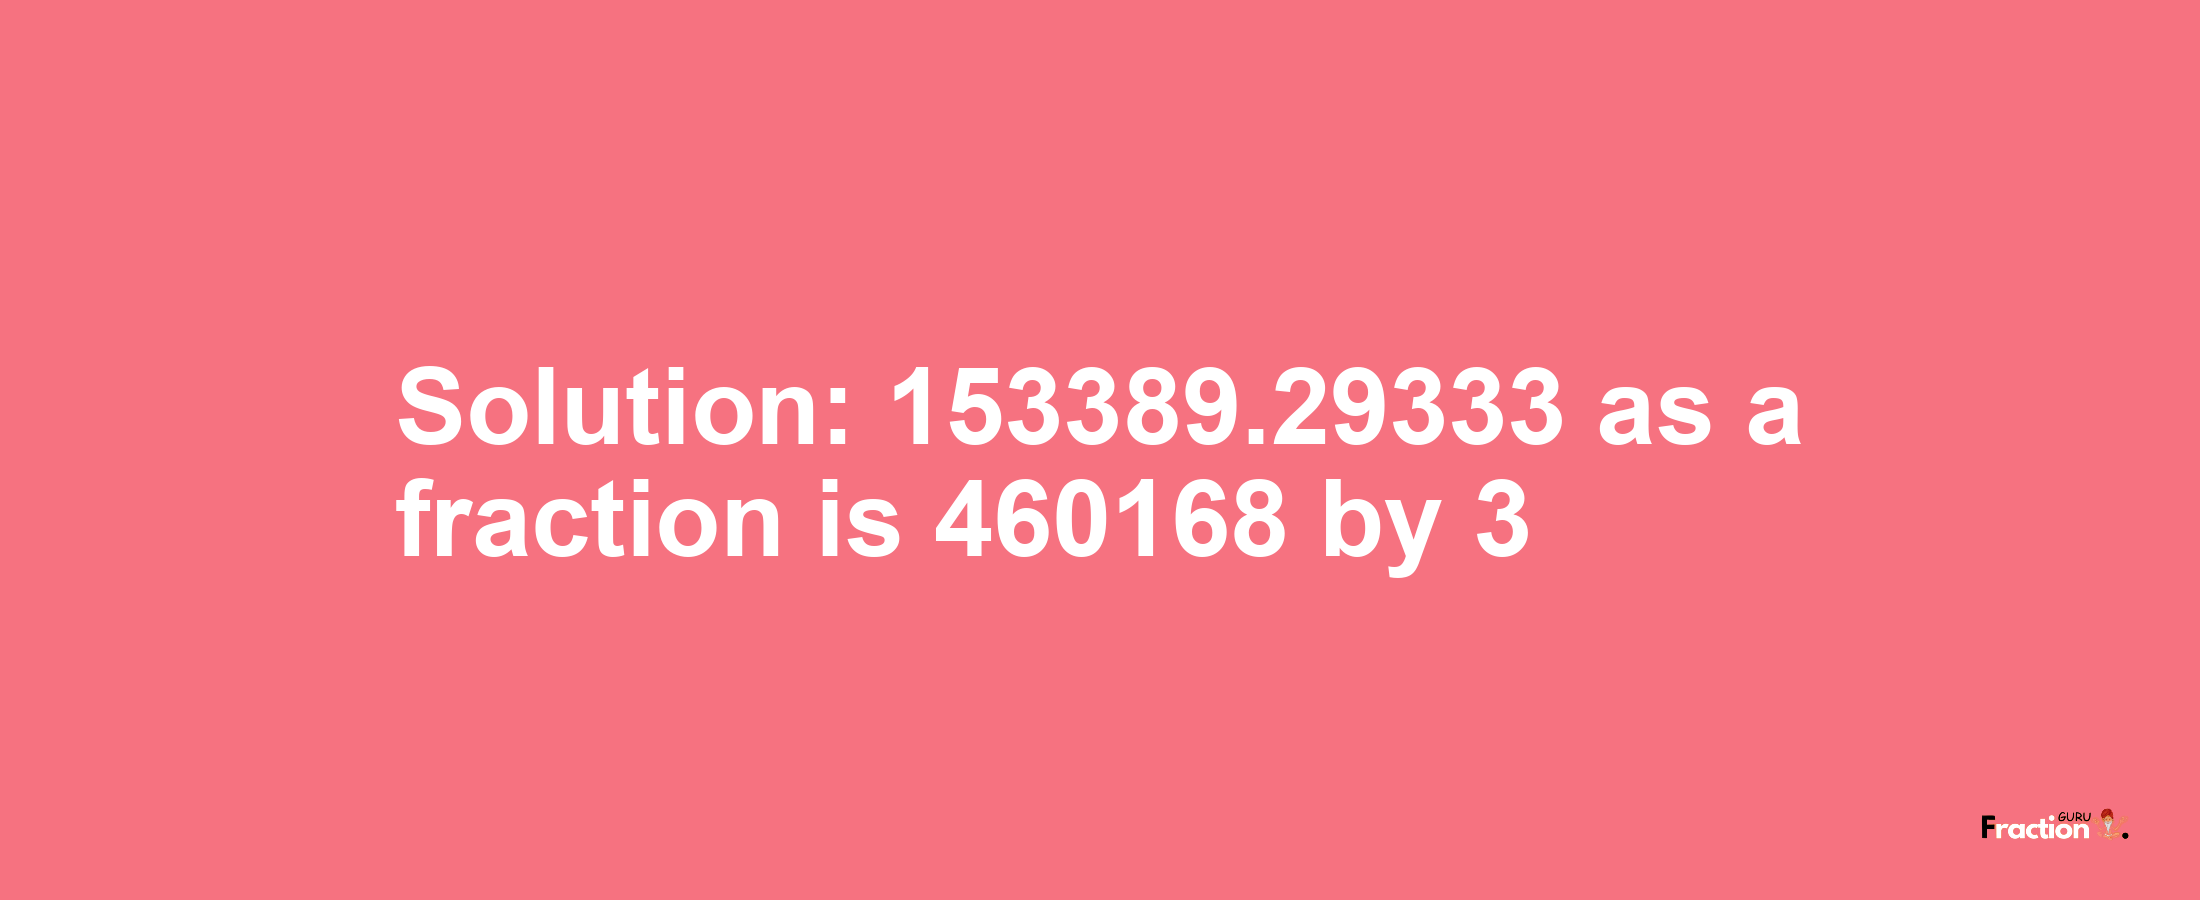 Solution:153389.29333 as a fraction is 460168/3